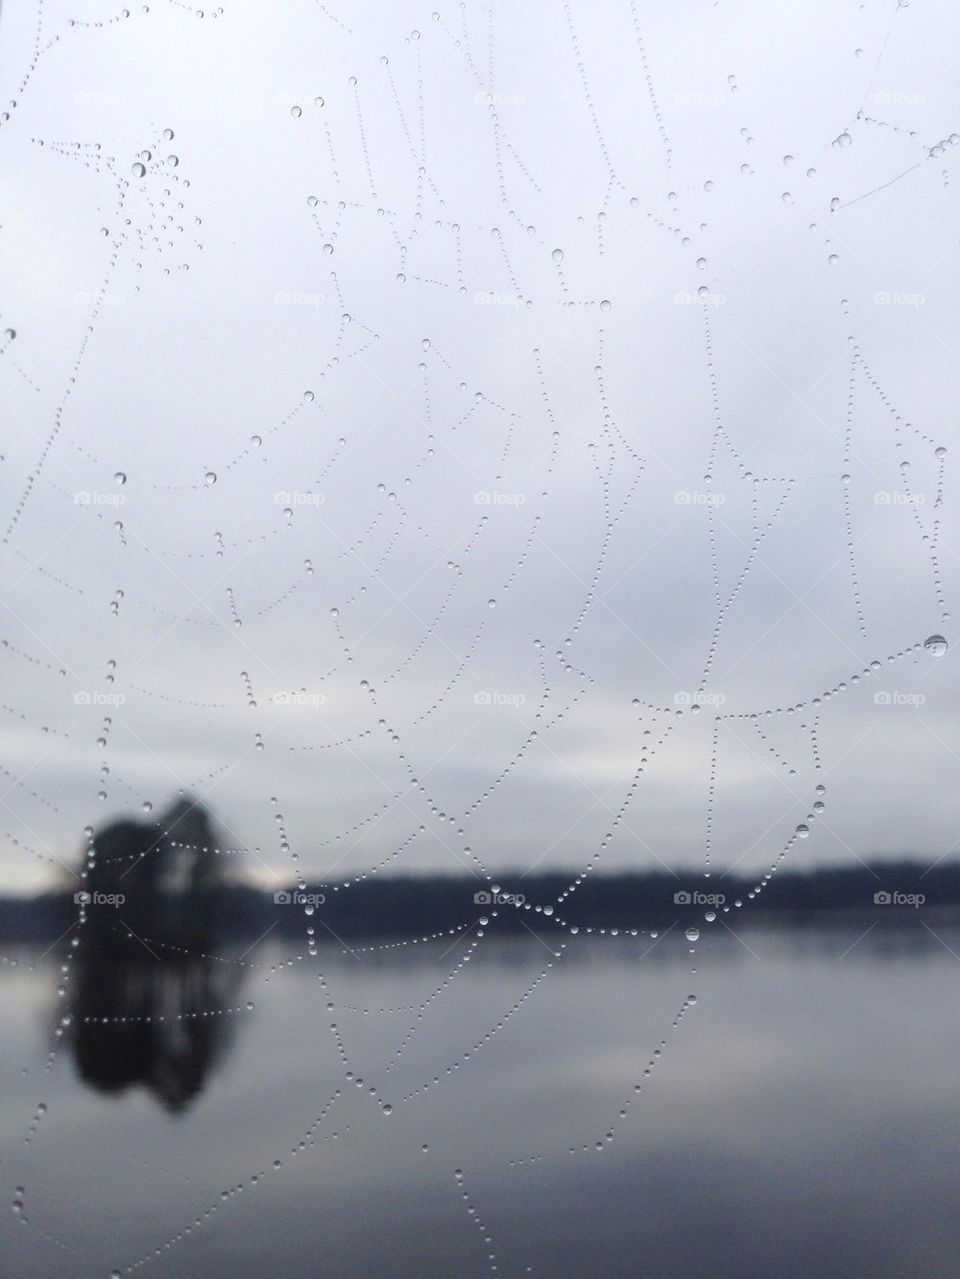 Spider web lake and water drops 